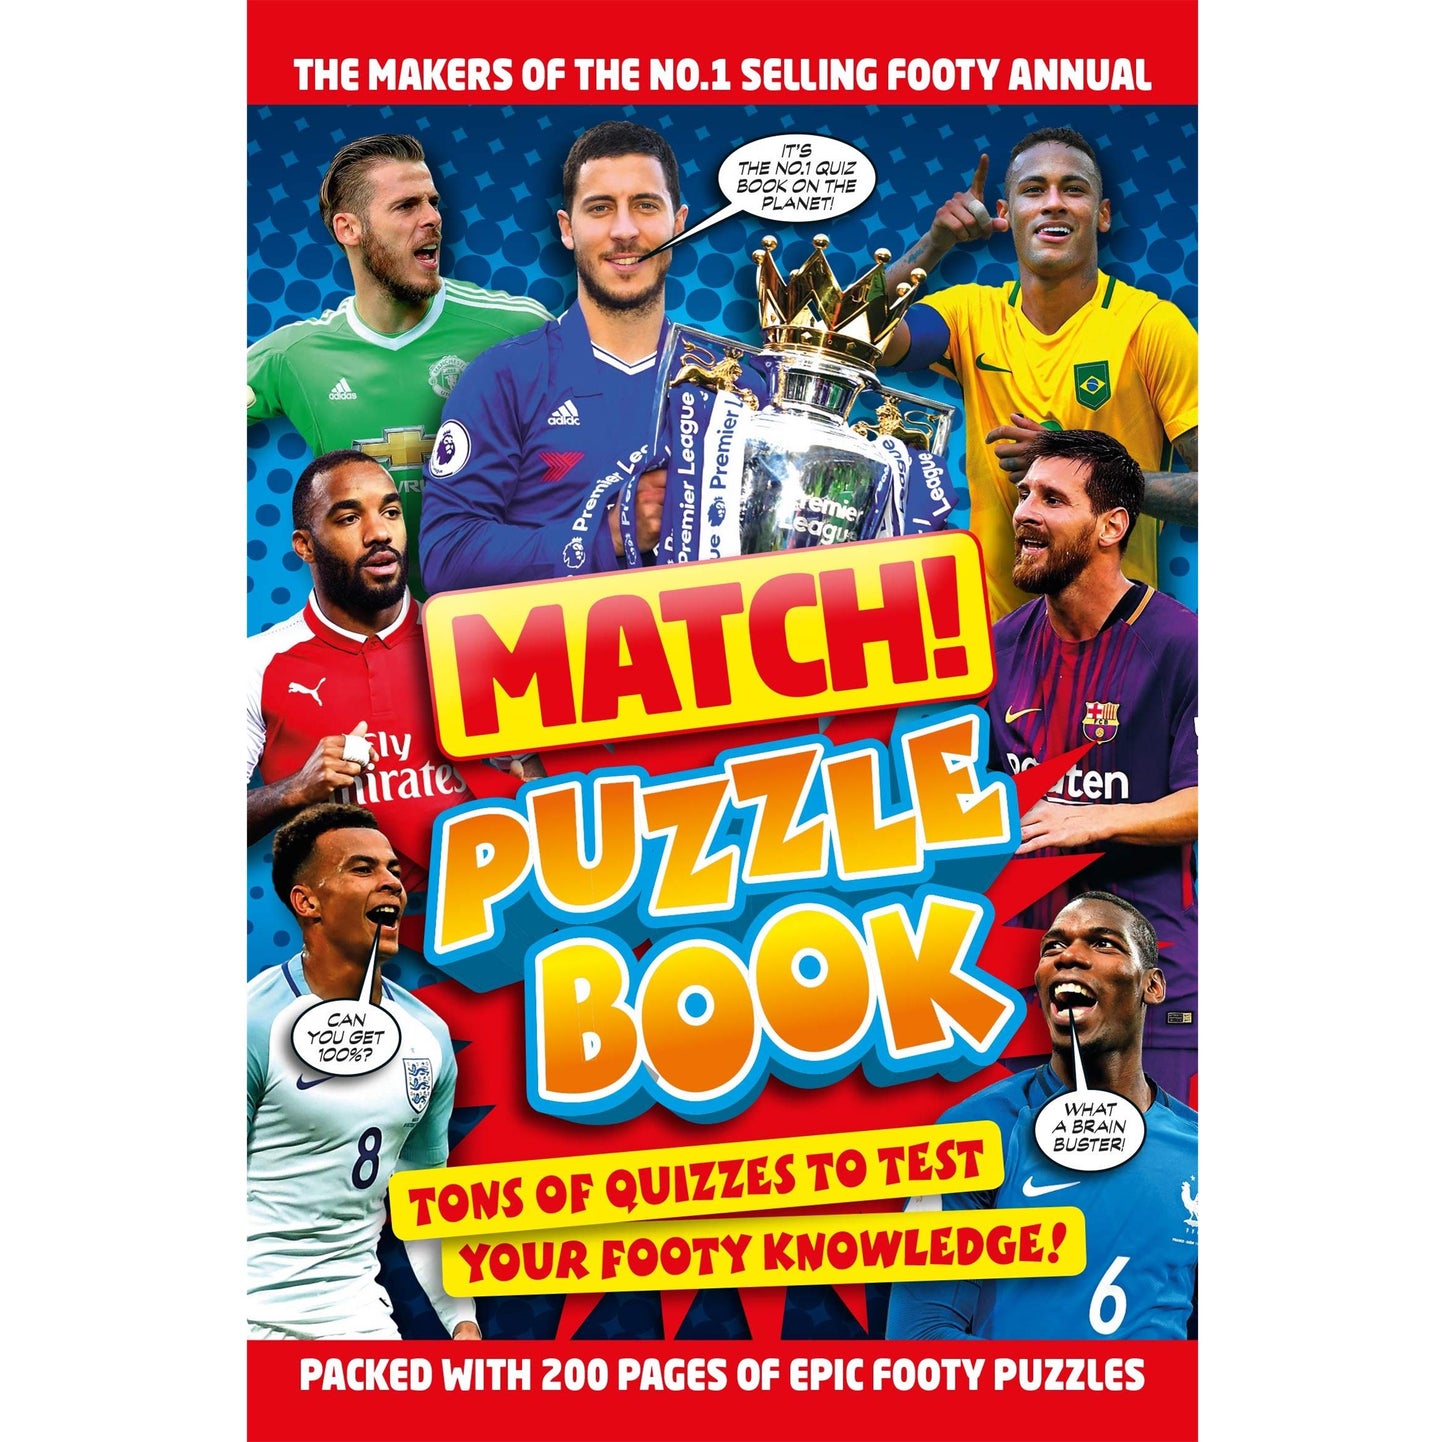 Match! Football Puzzle Book